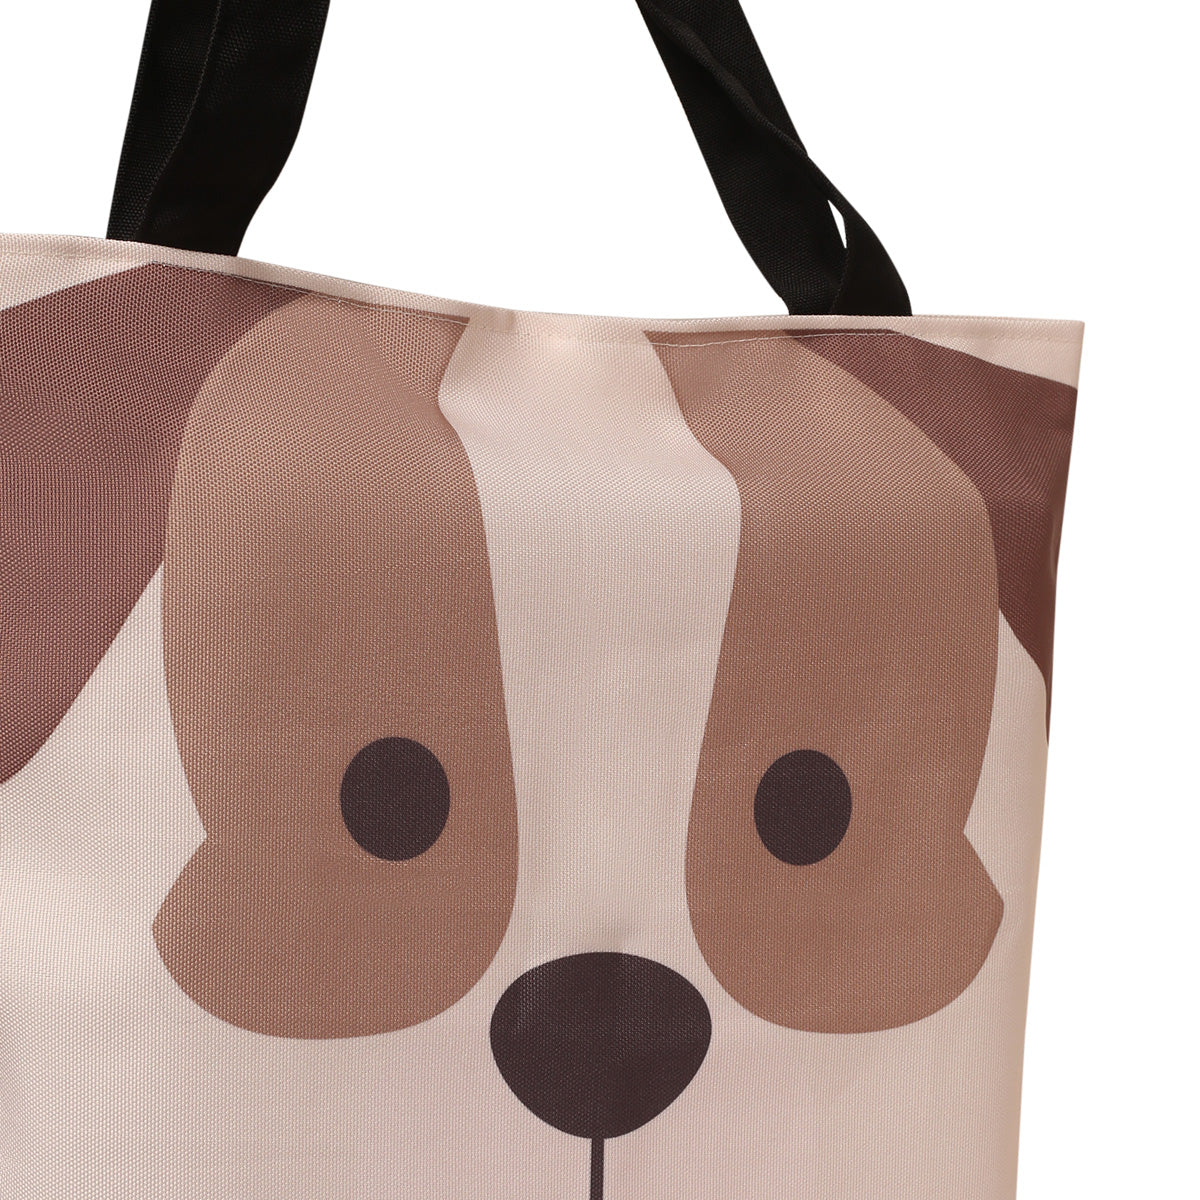 Tote bag adorned with an adorable dog face, a stylish accessory for pet enthusiasts.